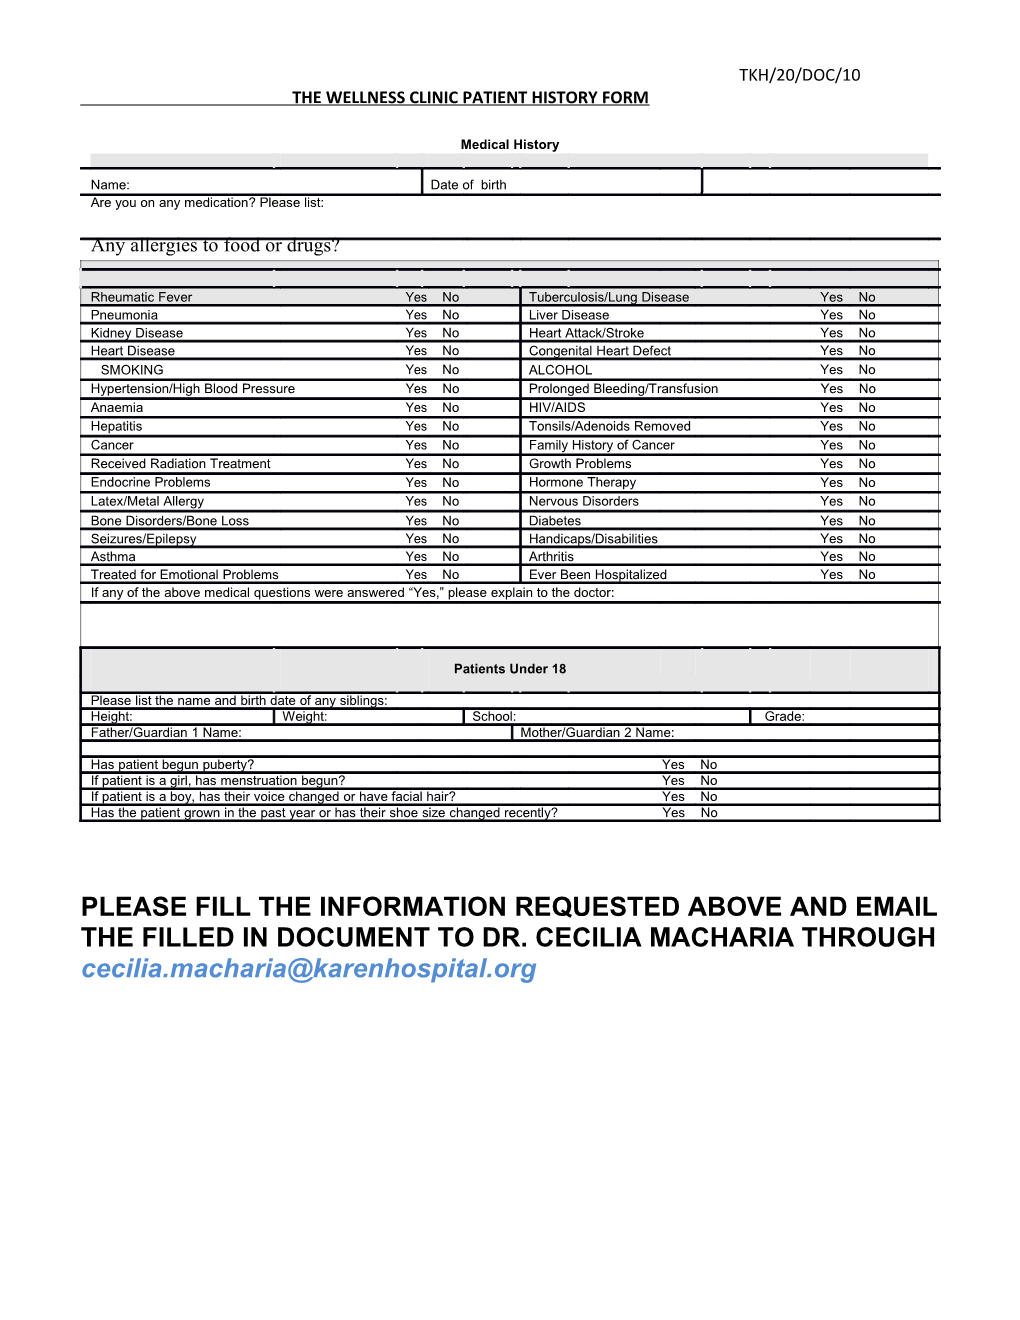 The Wellness Clinic Patient History Form